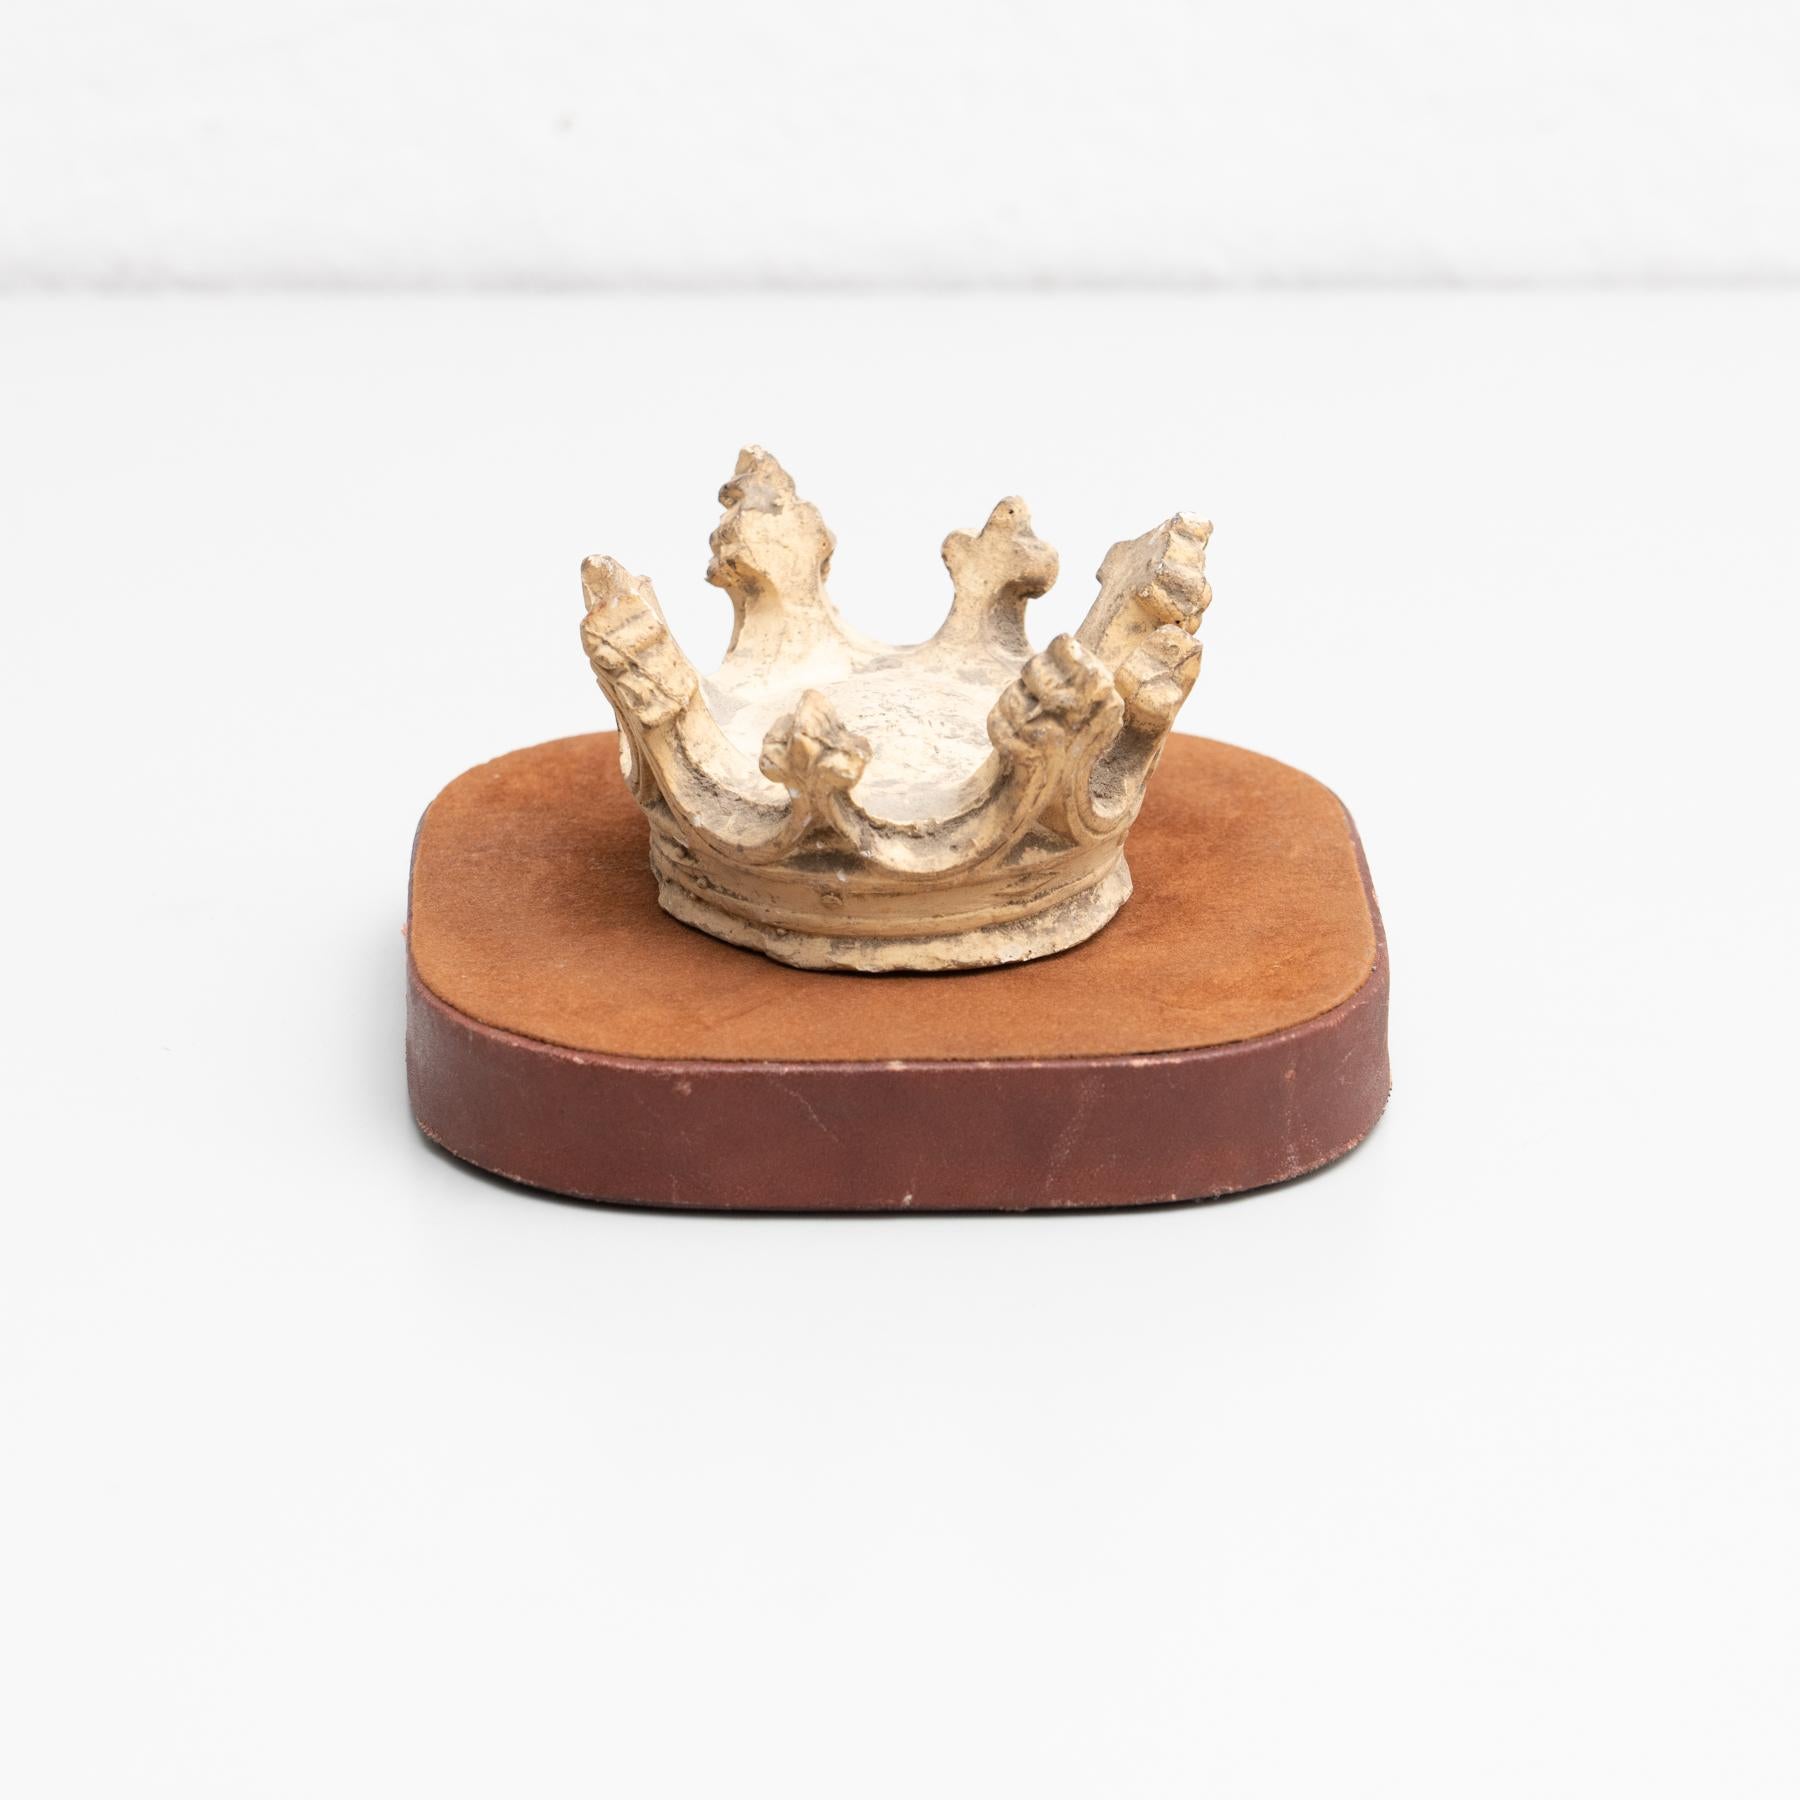 Plaster crown on a stand artwork.

Made in traditional Catalan atelier in Olot, Spain, circa 1950.

Olot has a long tradition in the production of sculptures and religious imagery. The art and industry of religious statuary has been established